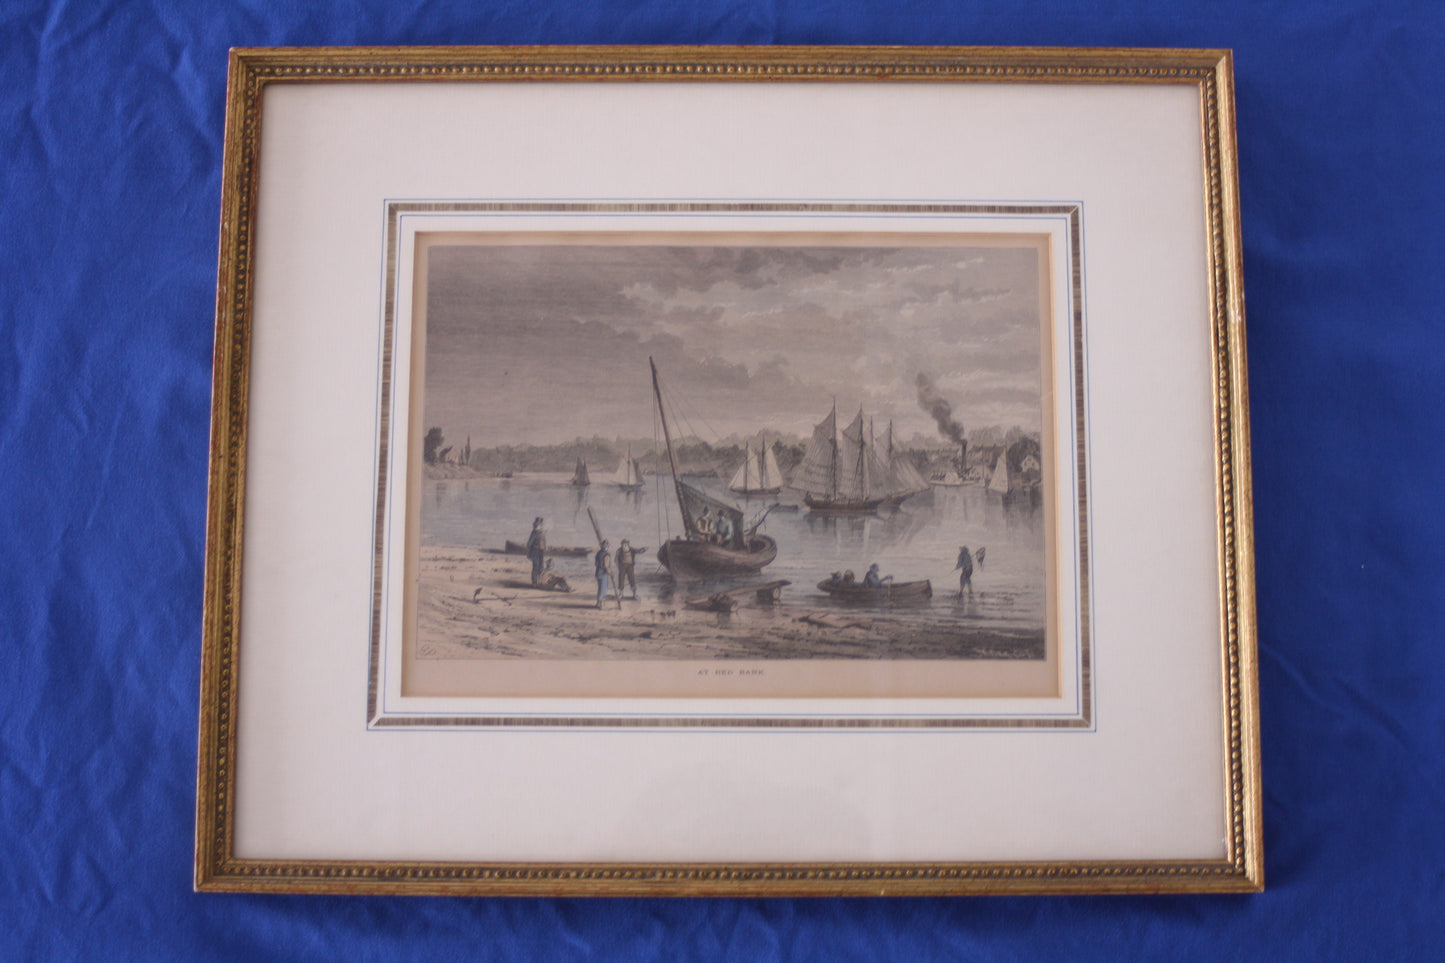 Framed Vintage Print- "AT RED BANK, NY" Picturesque America- c1880